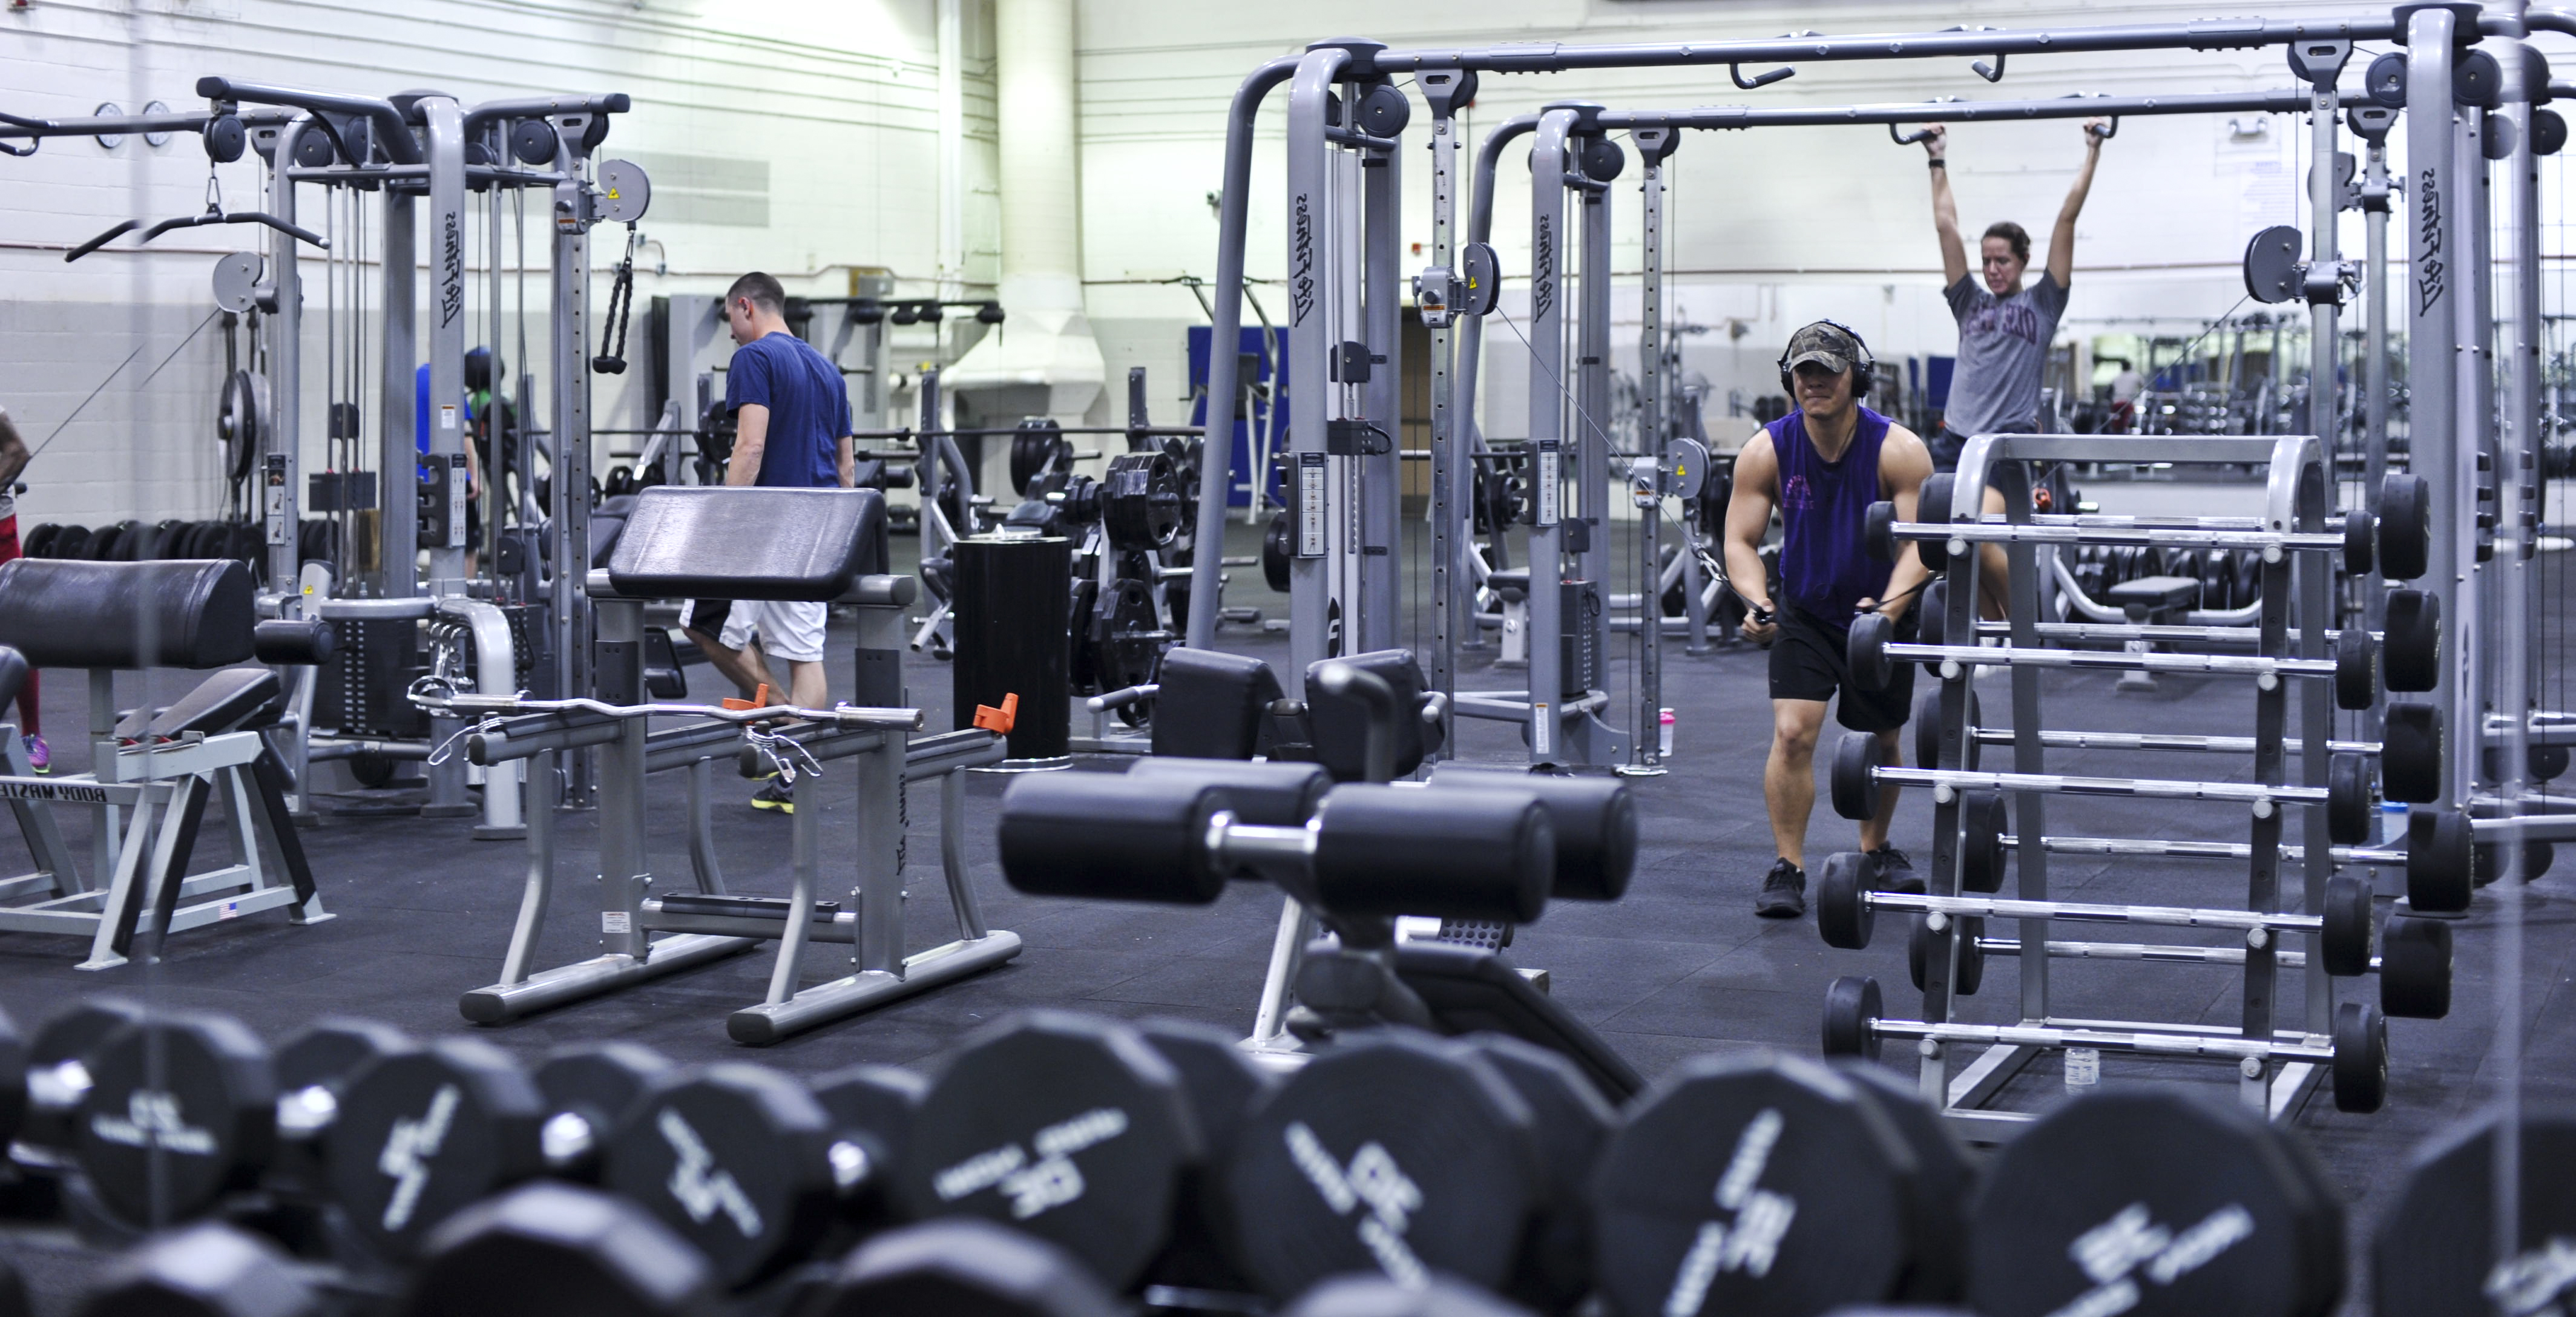 Commando Fitness Center Implements New After Hours Policy Hurlburt